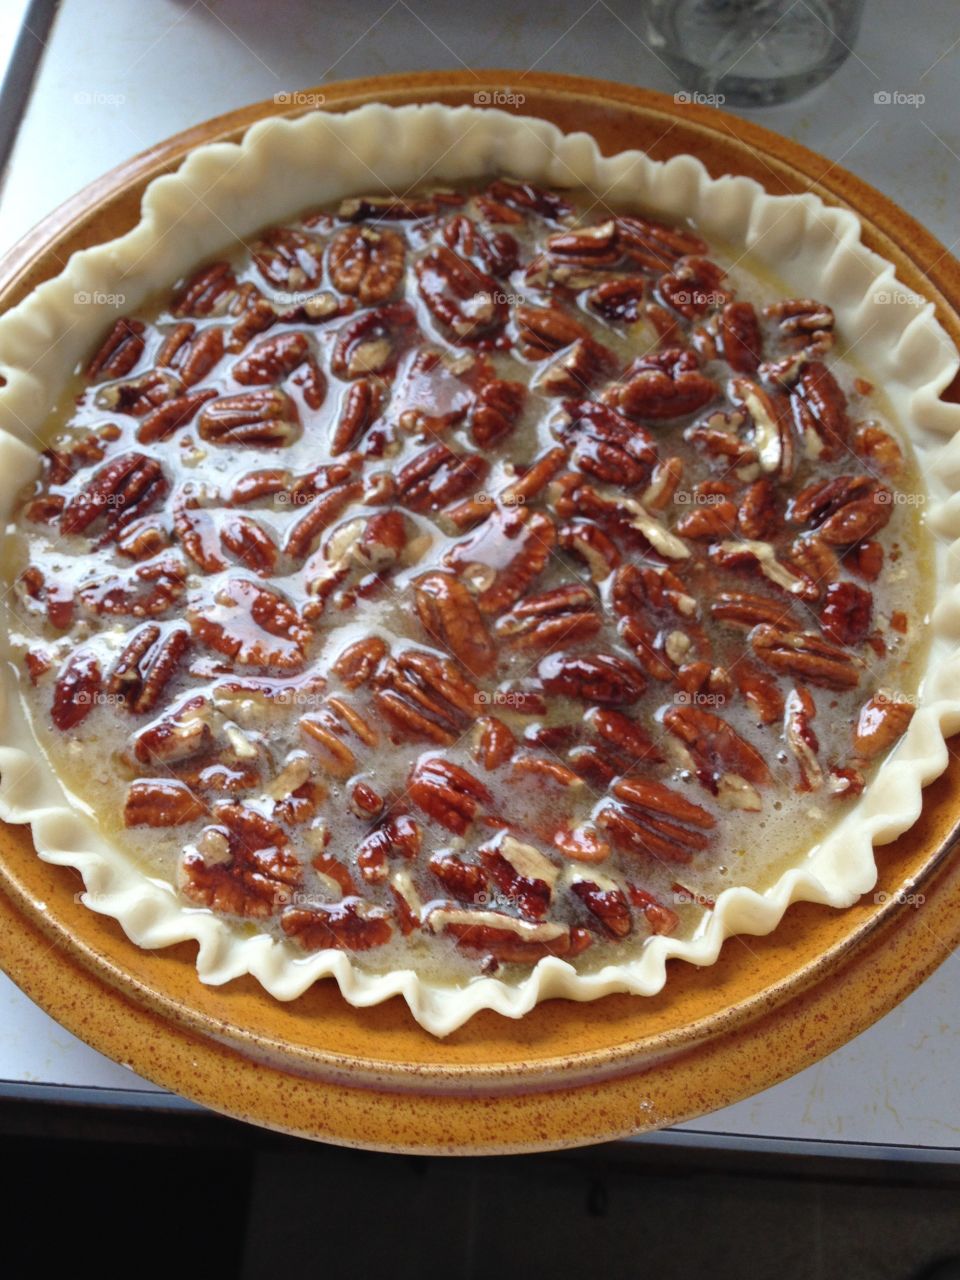 About to become the perfect pecan pie